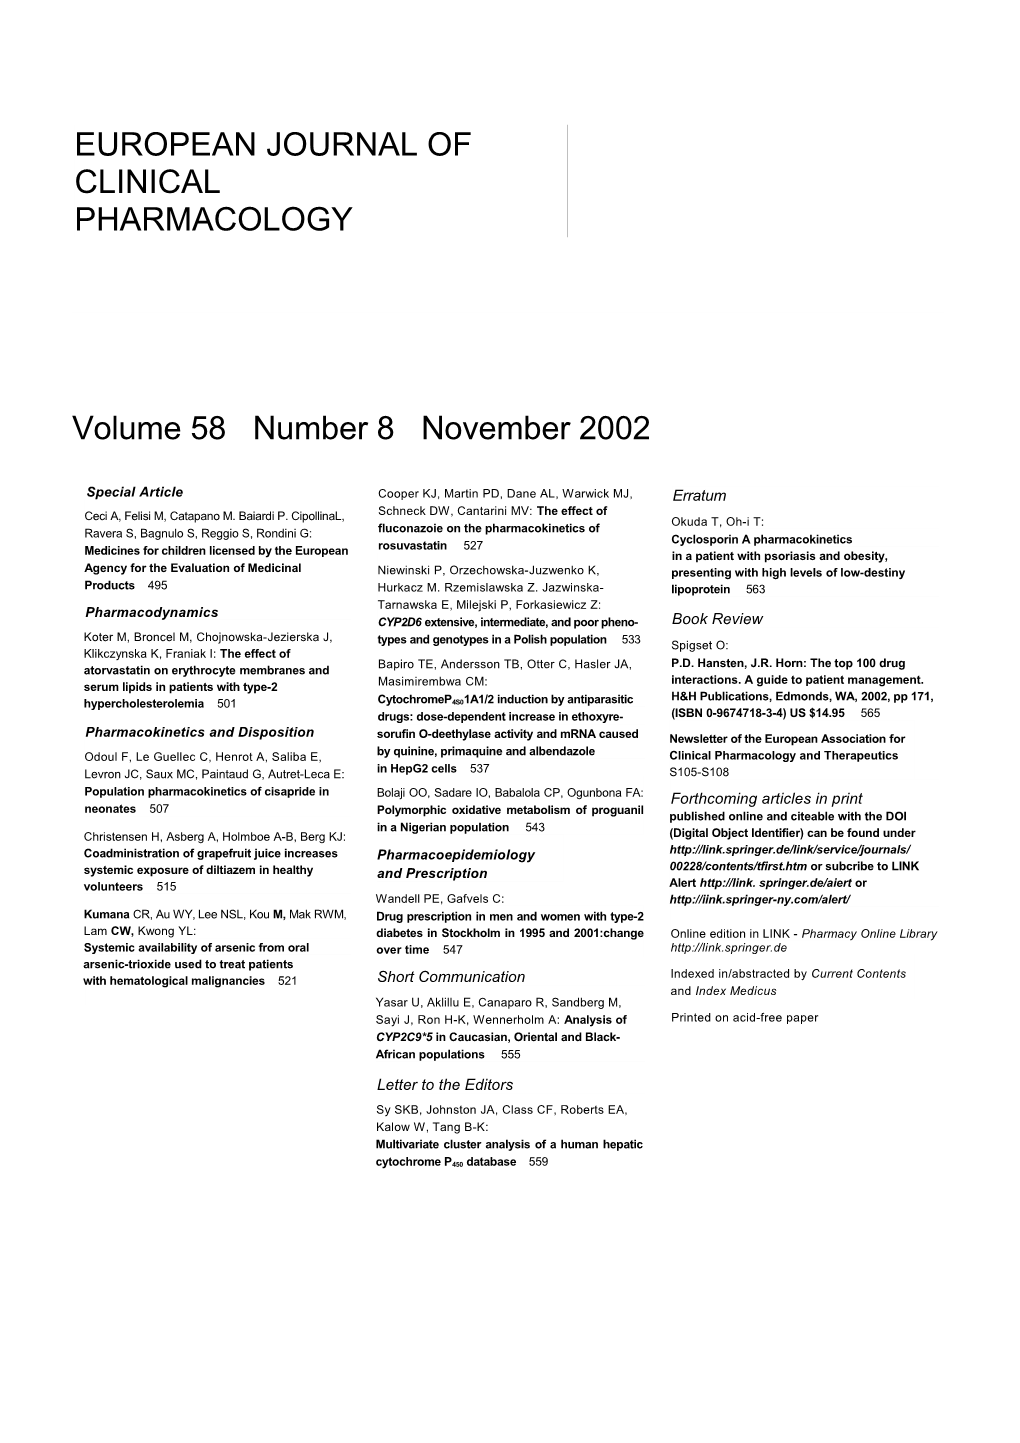 European Journal of Clinical Pharmacology s1